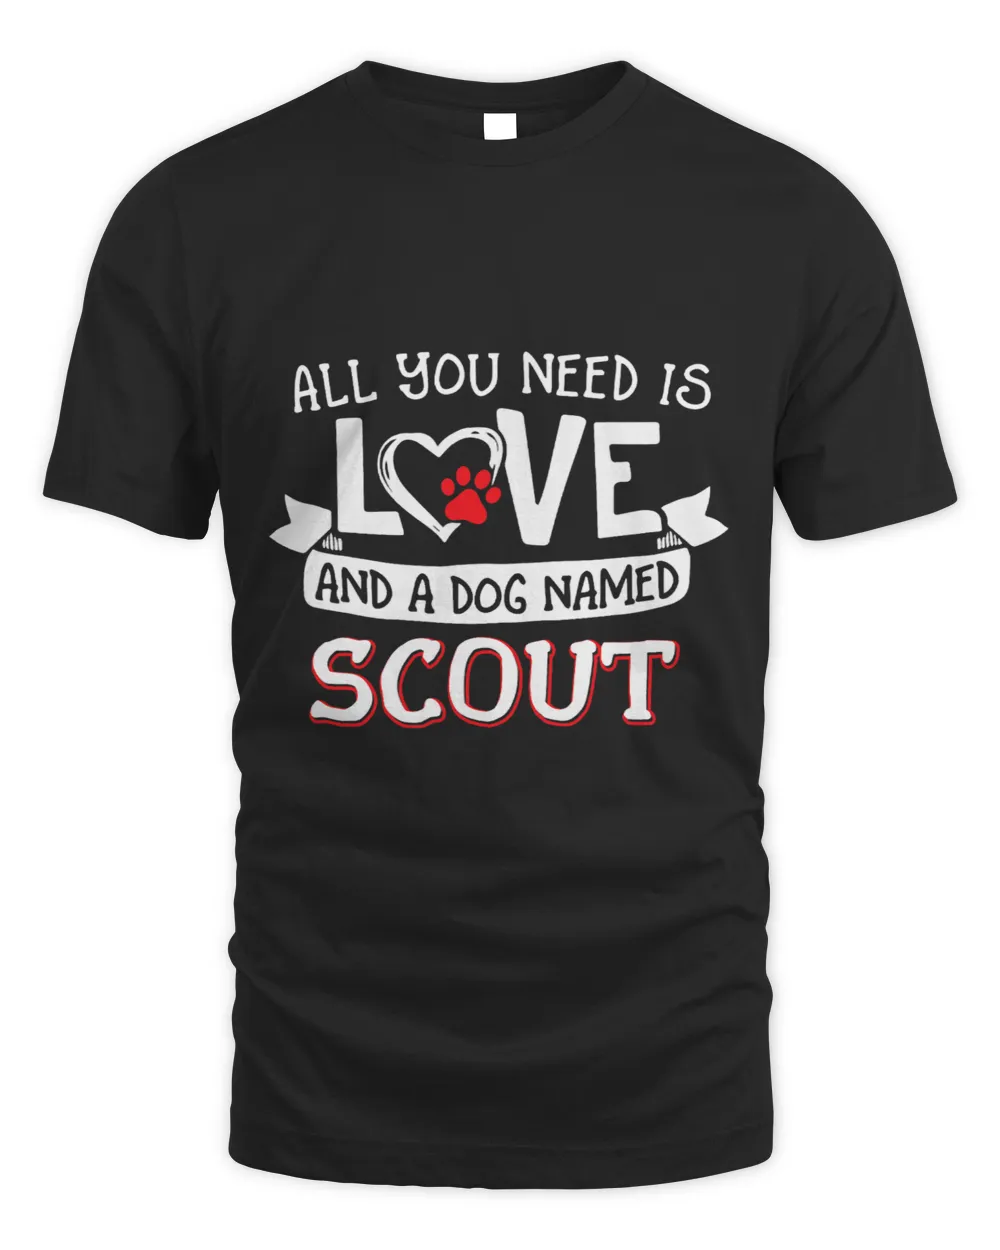 All you need is love and a dog named Scout small large